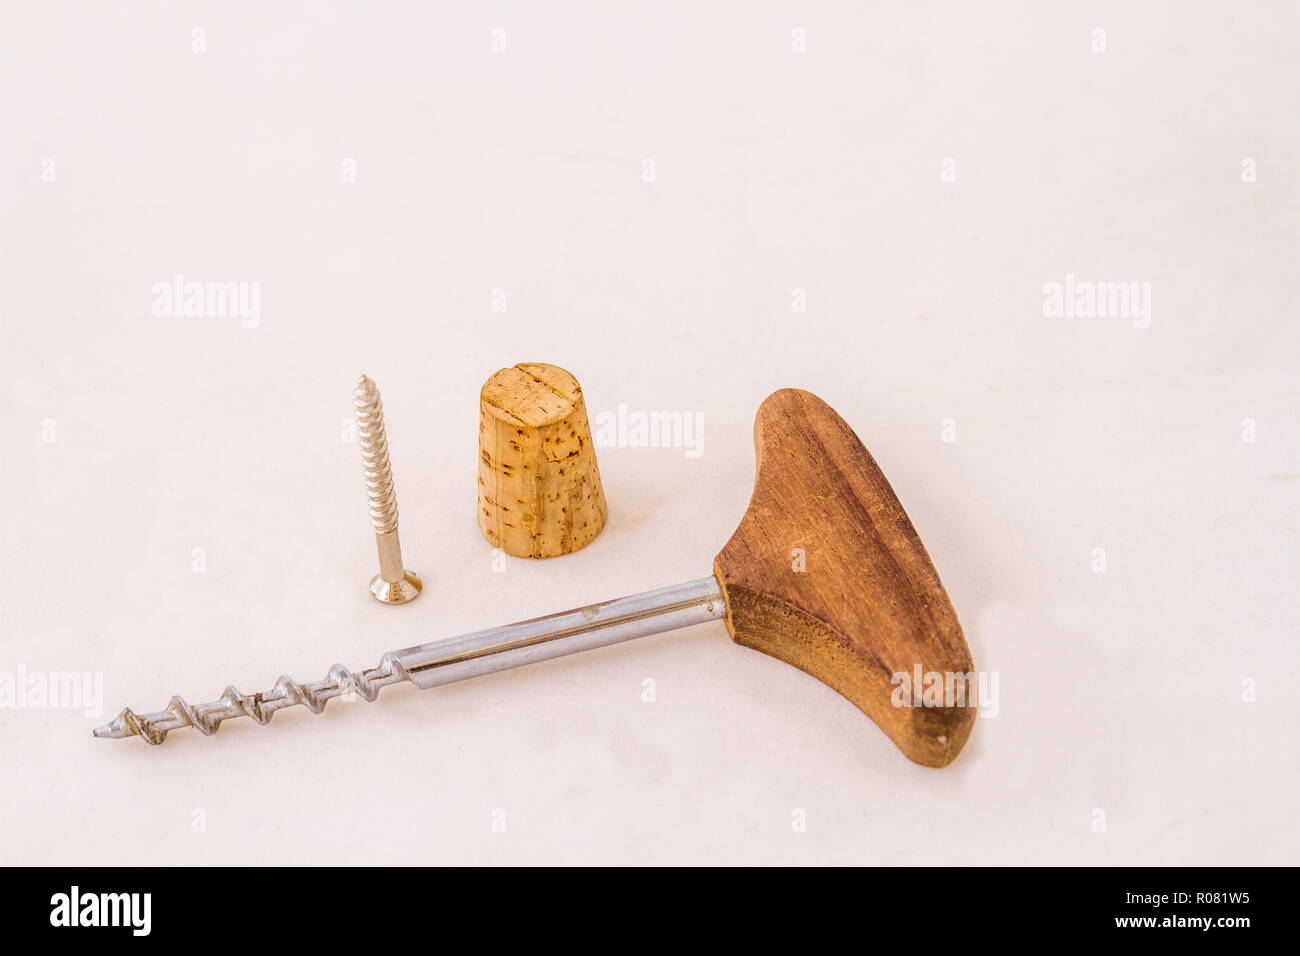 A cork a screw and a corkscrew isolated on a white background image with copy space in landscape format Stock Photo